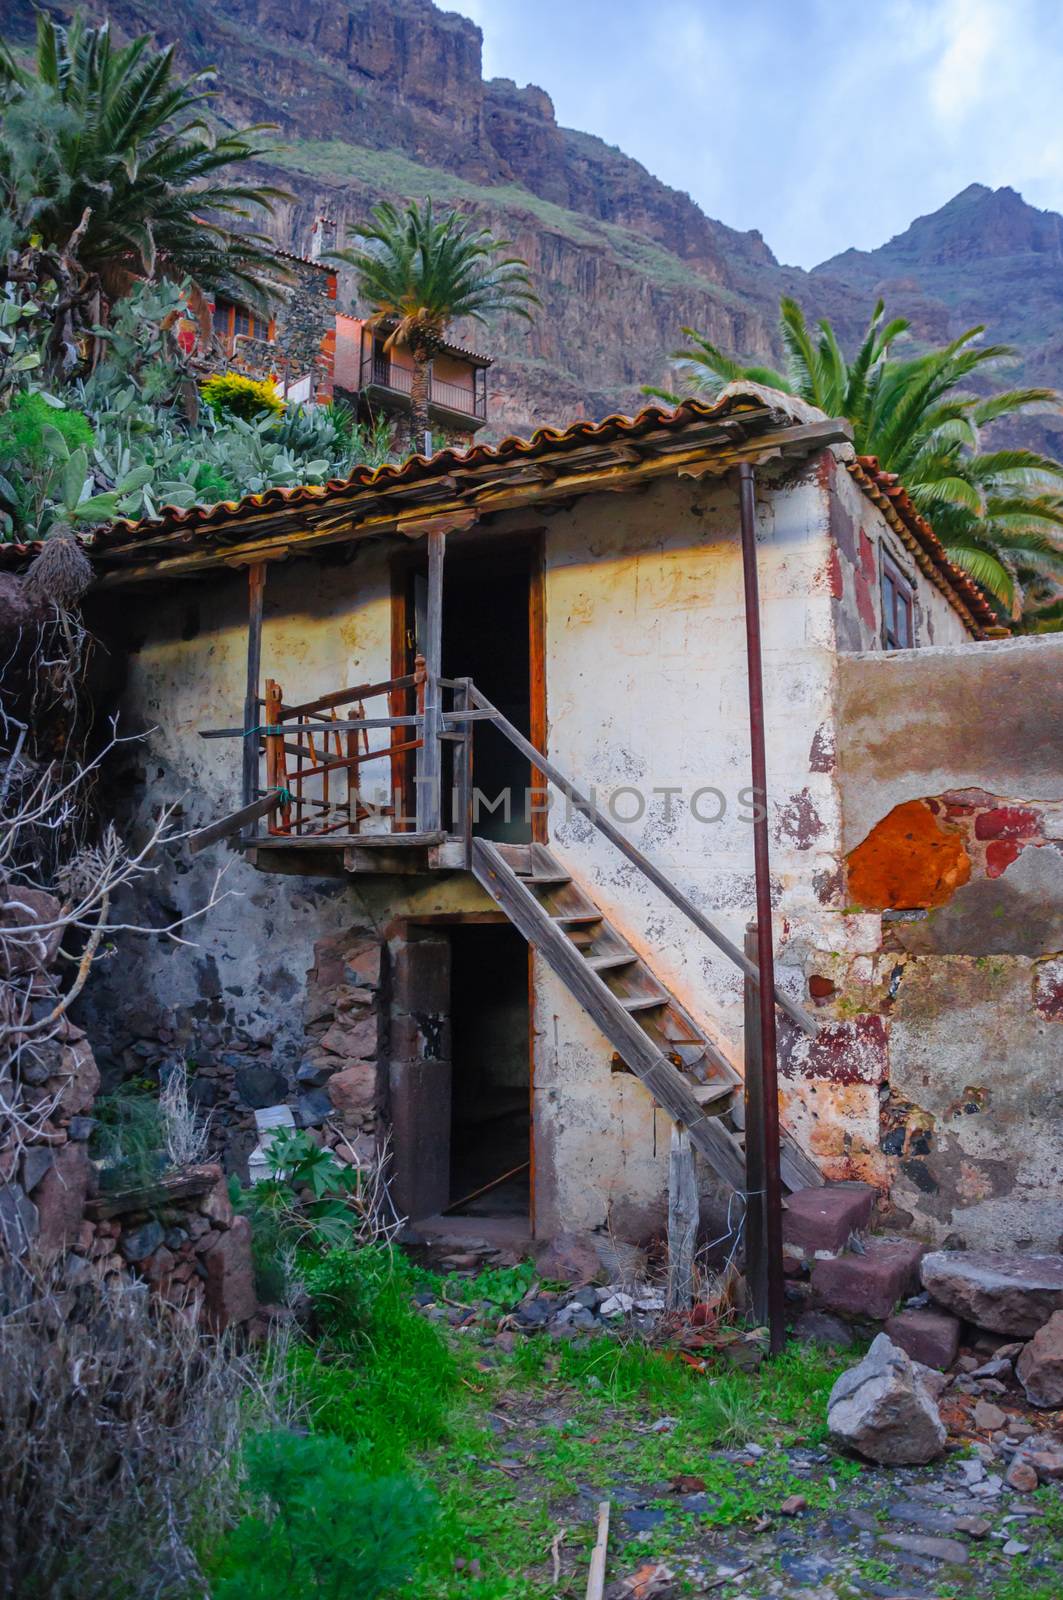 Ruins of an old house in Masca village, Tenerife, Canarian Islan by Eagle2308